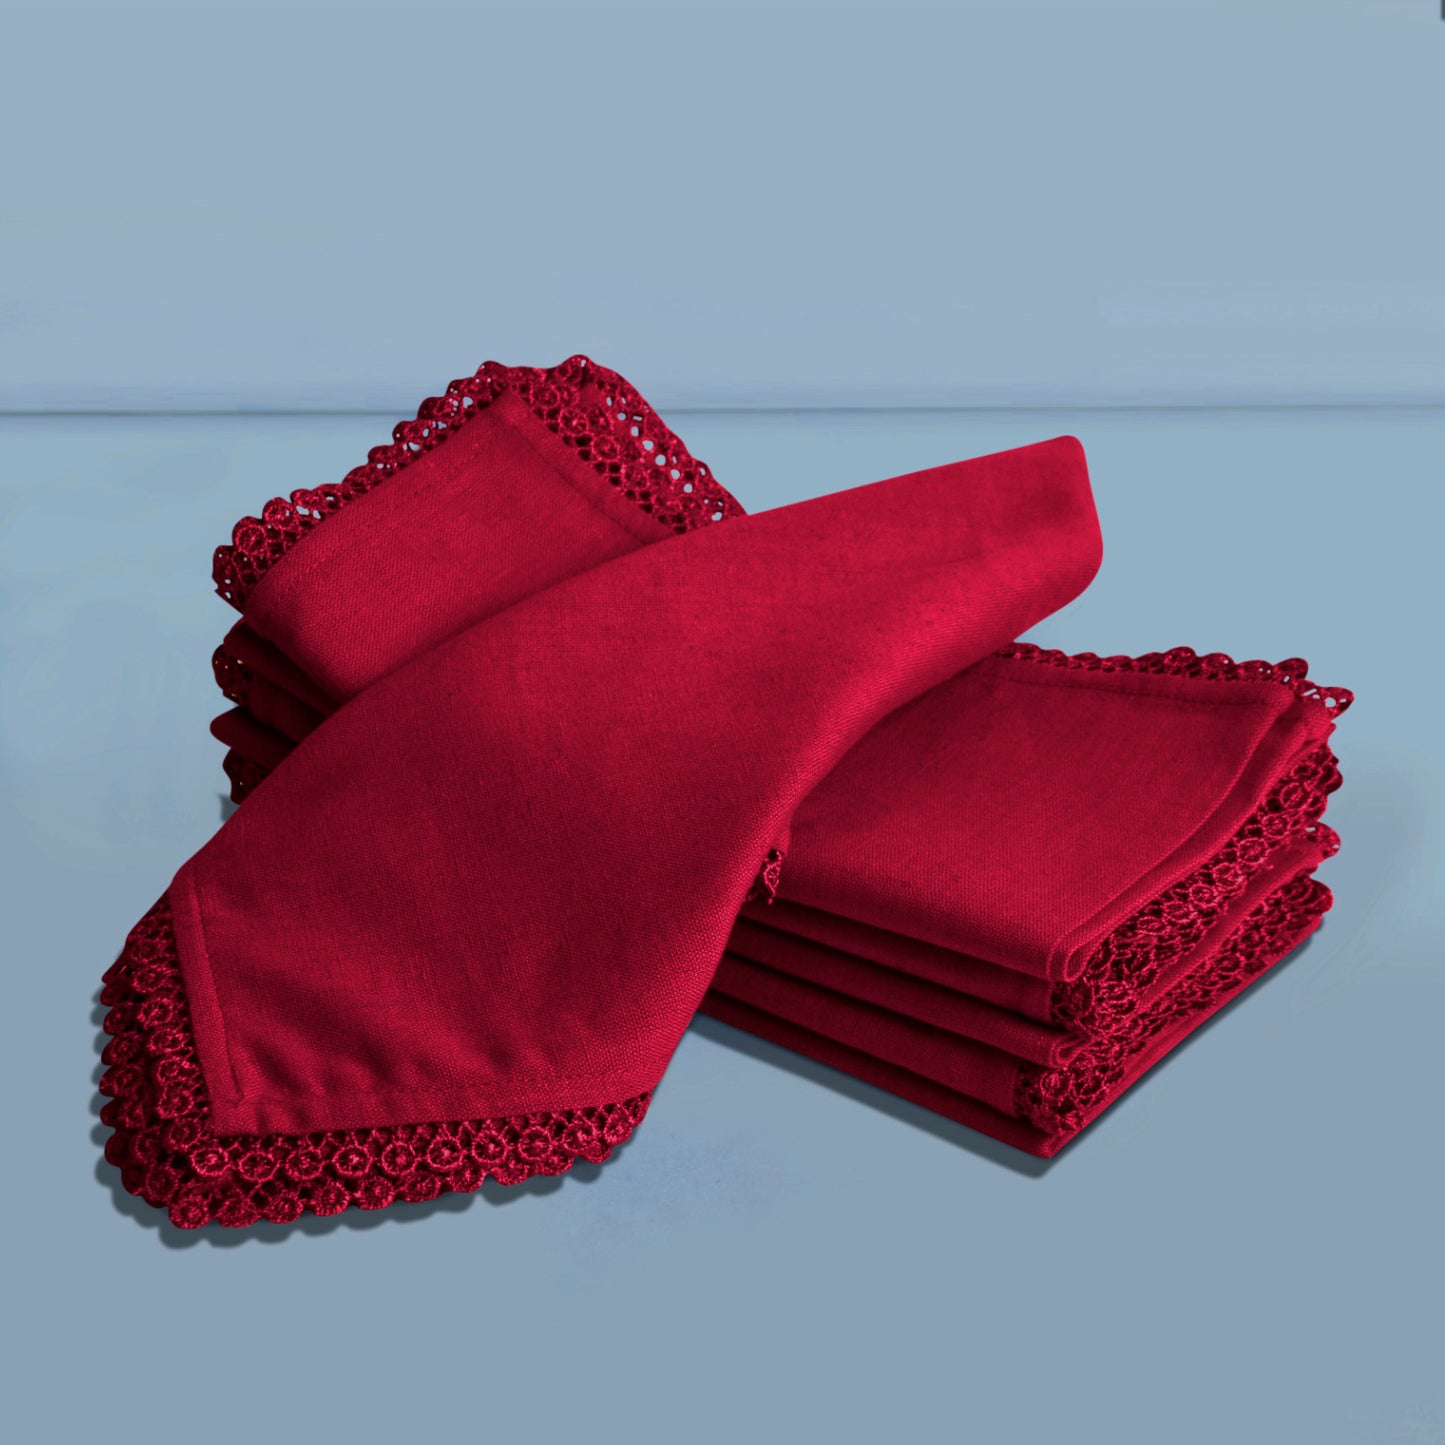 Dining Table Premium Cotton Table Napkin with Crochet Ends (Set of 6, Maroon)